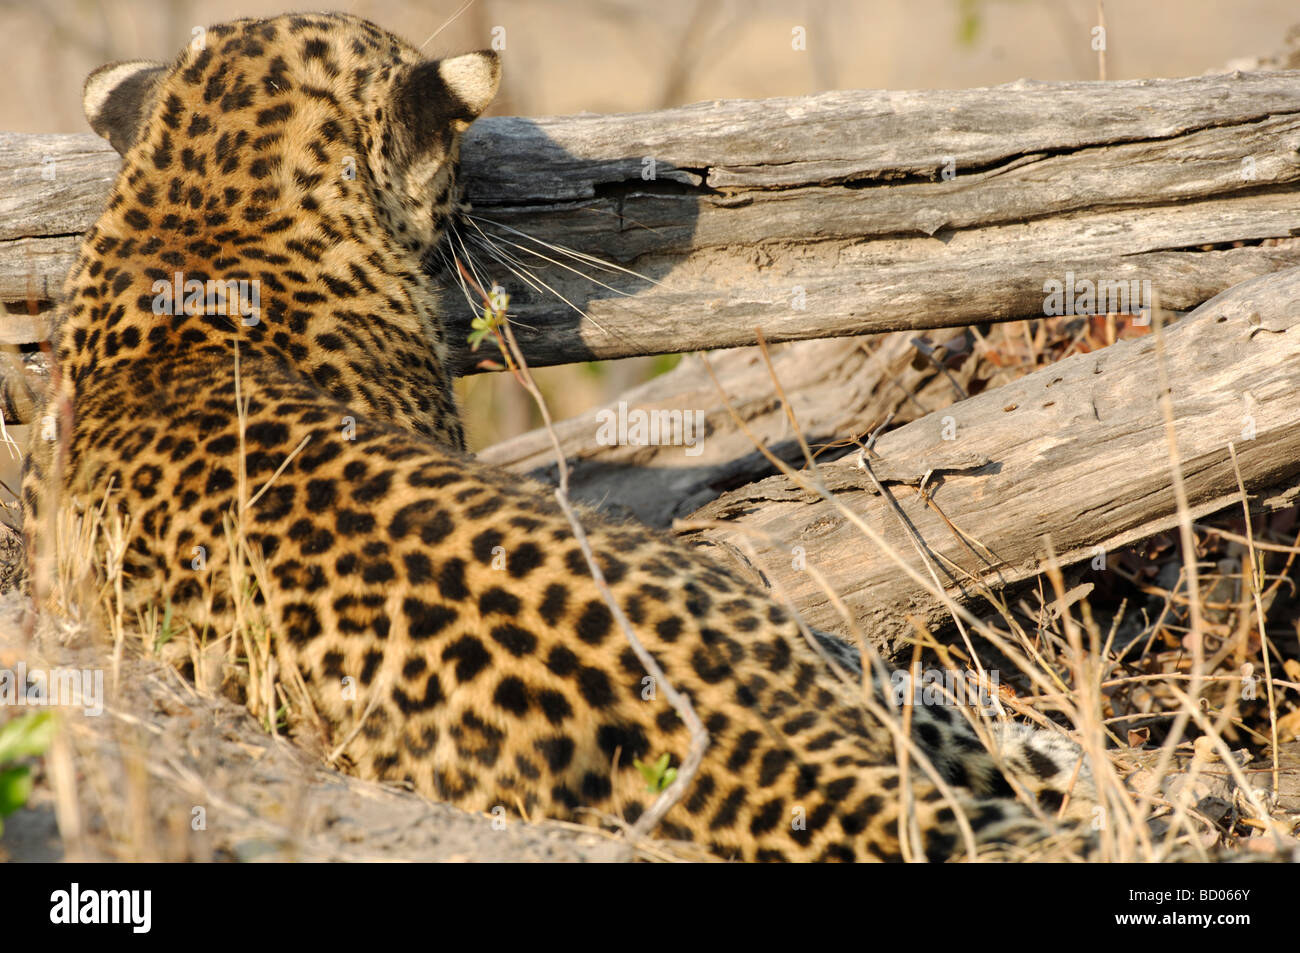 Stock photo of a leopard peering over a log, Linyanti, Botswana, 2007. Stock Photo